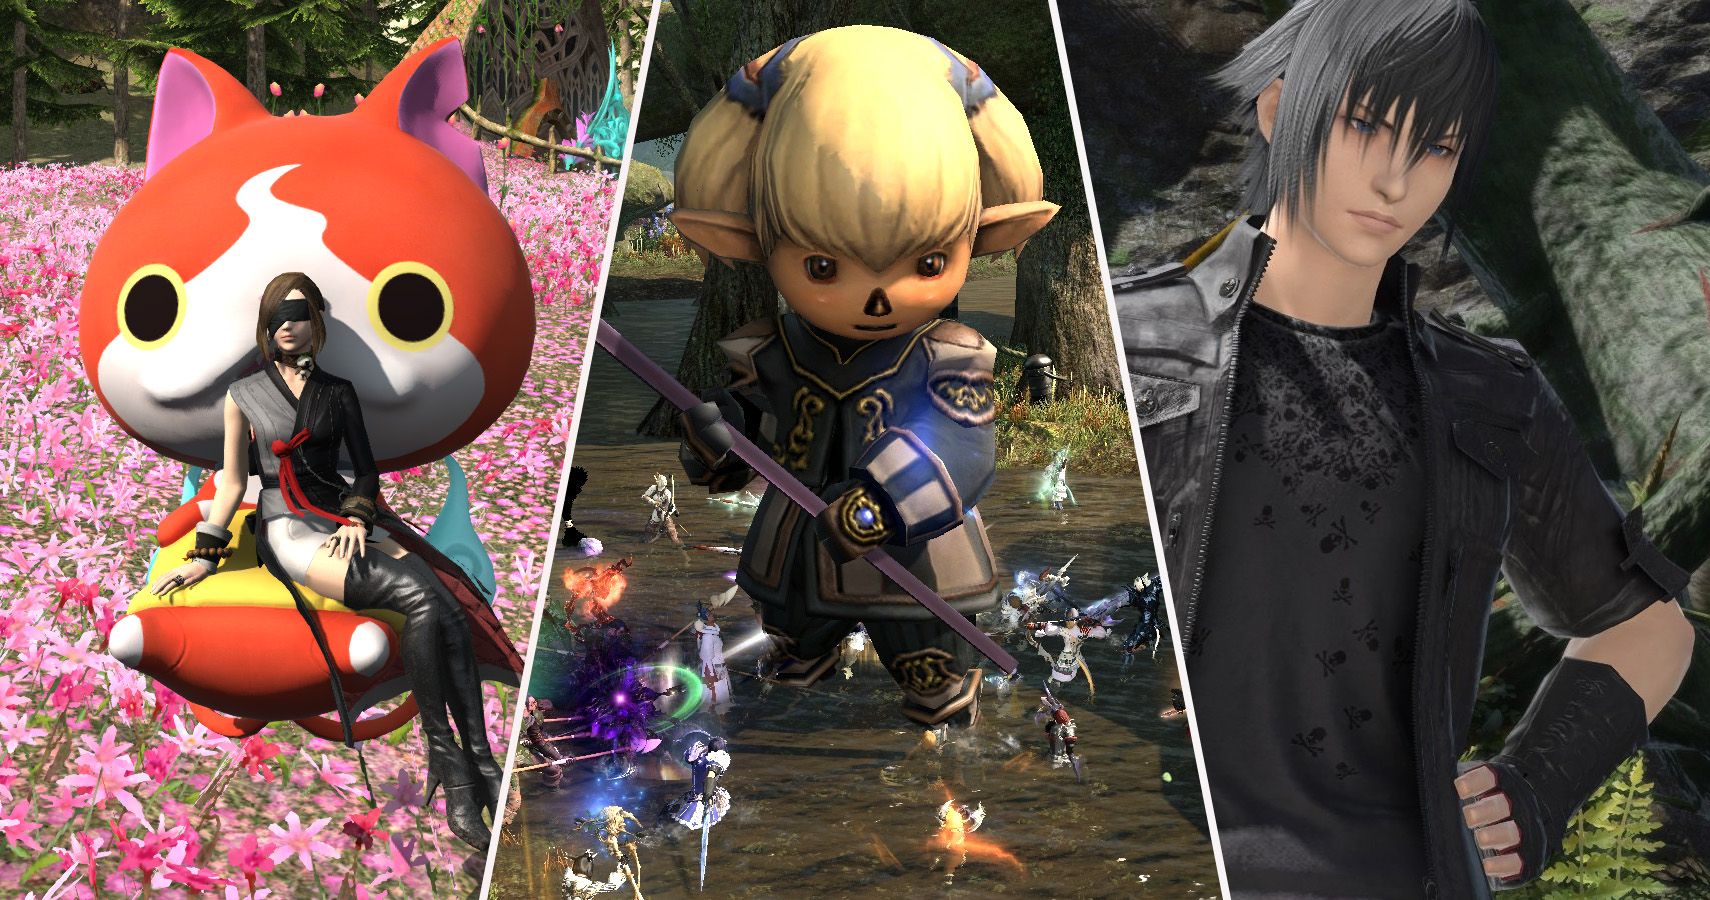 Final Fantasy 14 cross over event collage